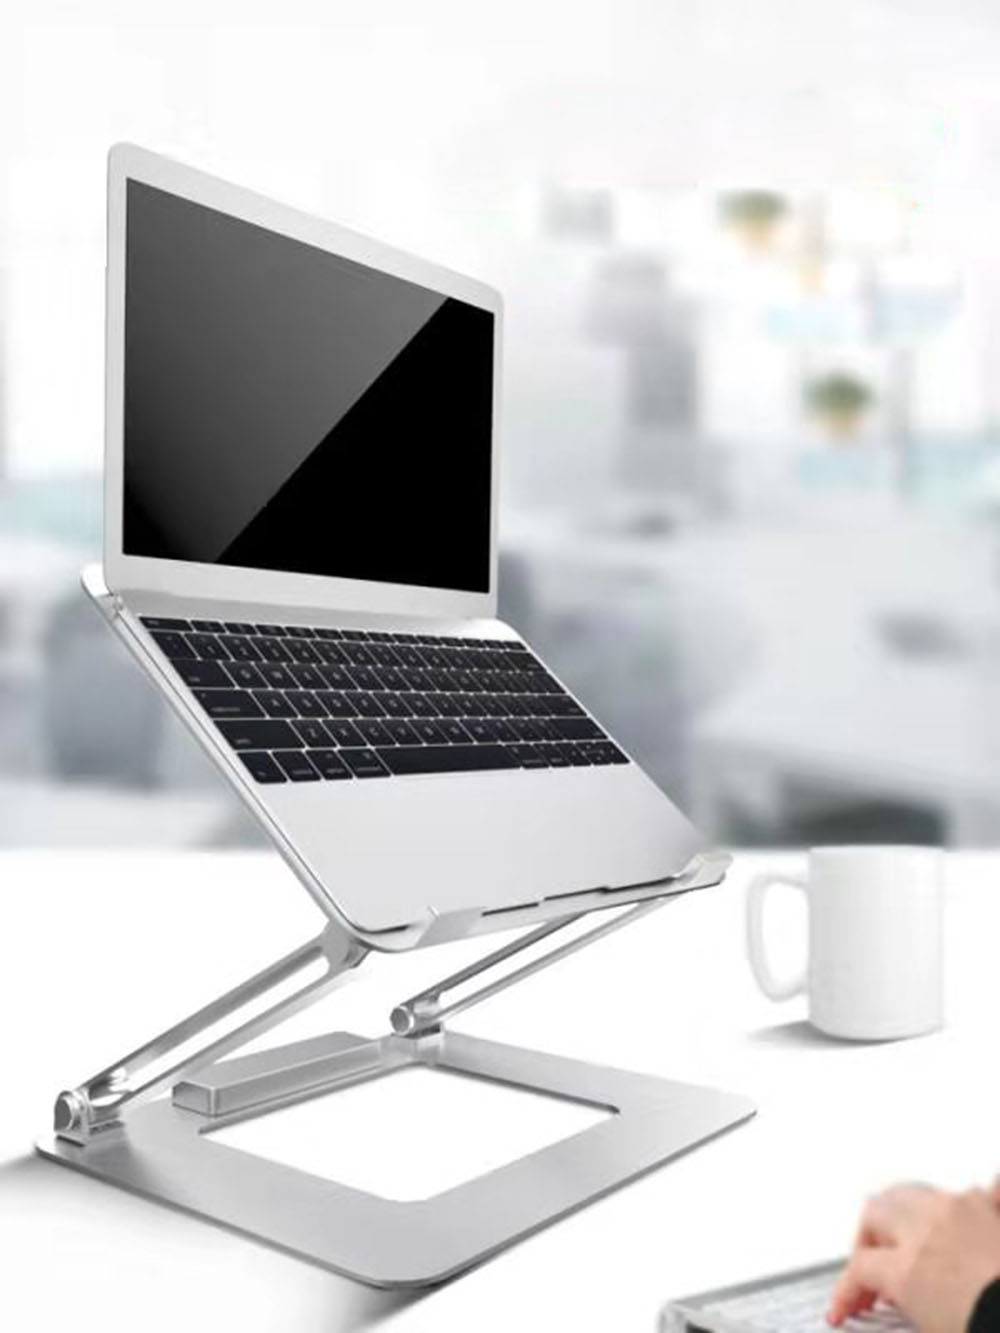 iDock-N37-3-Laptop-Stand-with-USB-30-Interface-Portable-Bracket-Foldable-Aluminum-Alloy-Computer-Hea-1725642-9